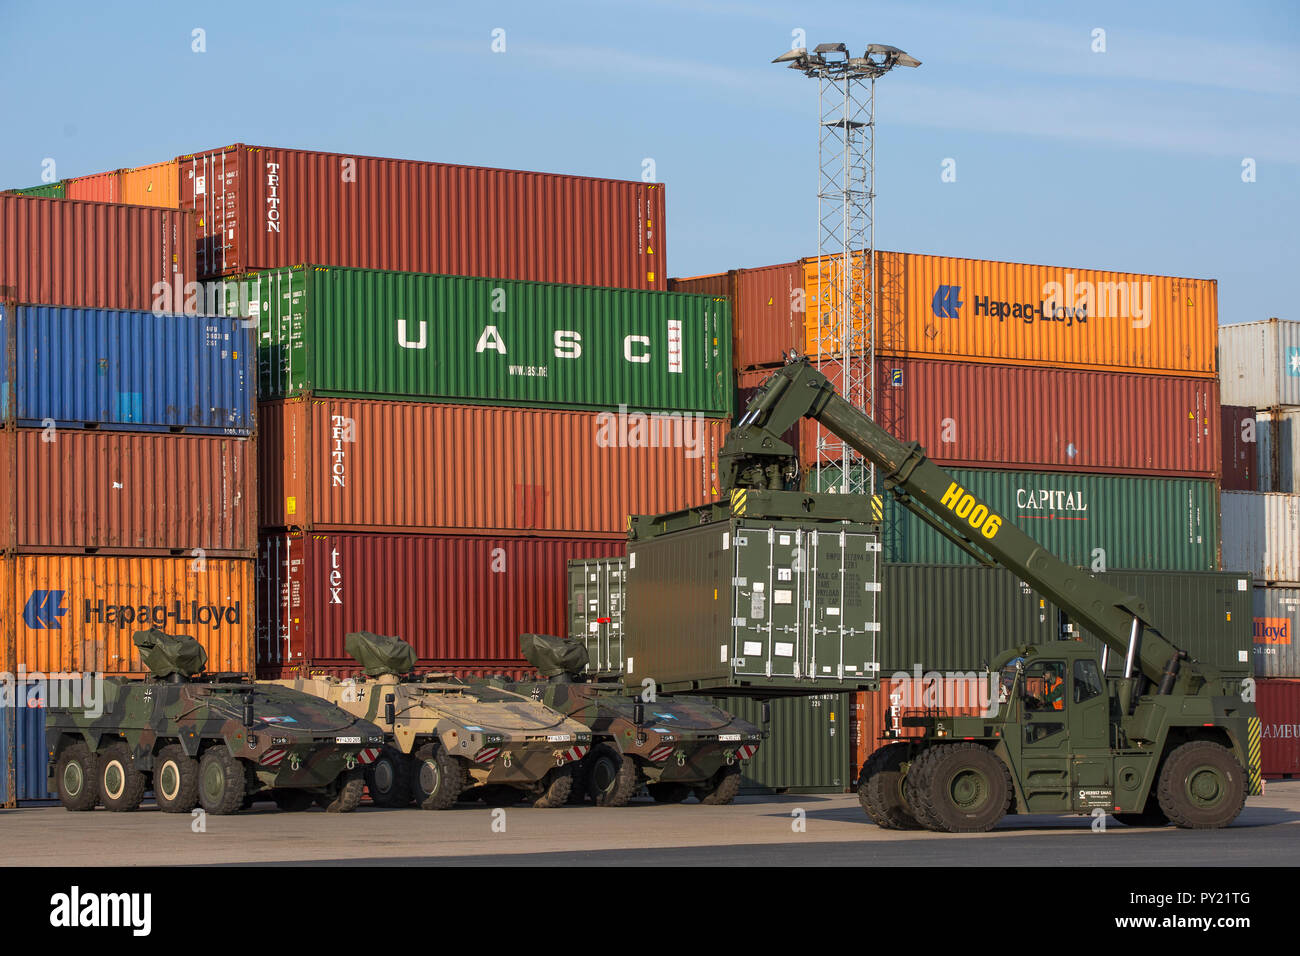 German armored transport vehicles Boxer-type are parked in the harbor area of Fredrikstad after the unloading process. A container handler 'Orion' by container transshipment. NATO exercise Trident Juncture in Norway, Fredrikstad on 11.10.2018.    Photo by Marco Dorow Stock Photo